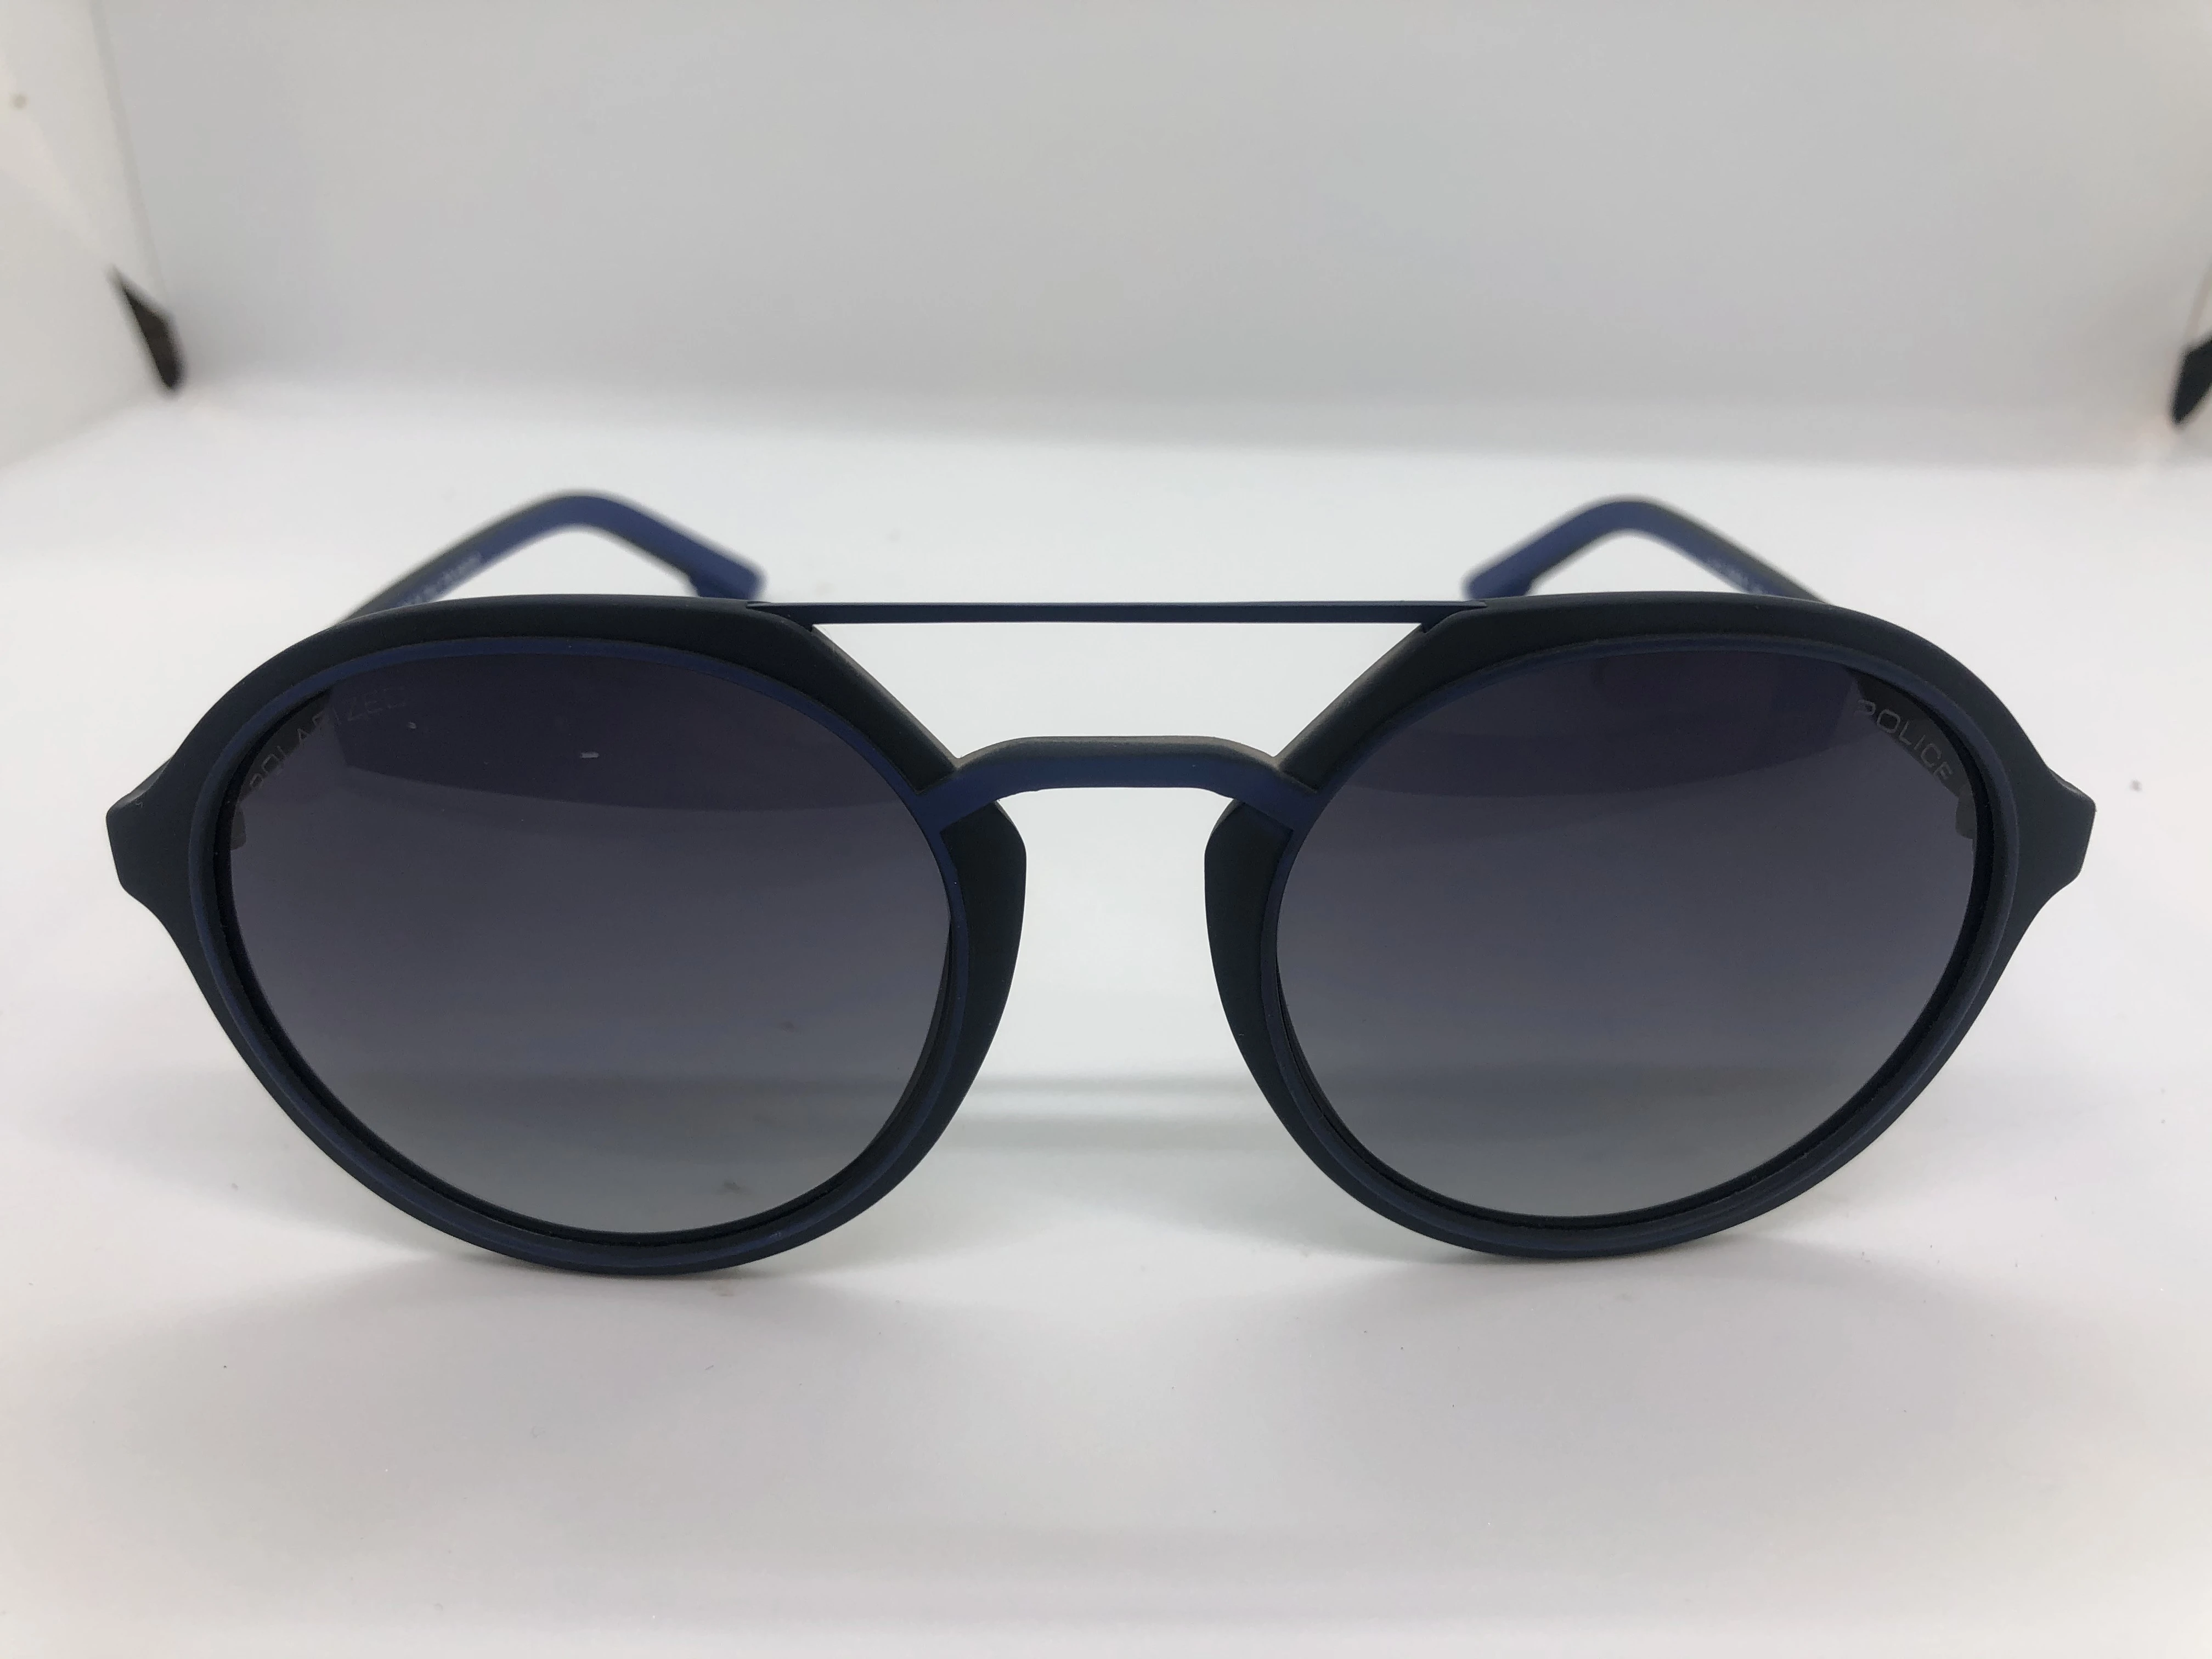 Round sunglasses - from police - with a navy frame * blue polycarbonate - black gradient lenses - and a navy * blue polycarbonate arm - for men